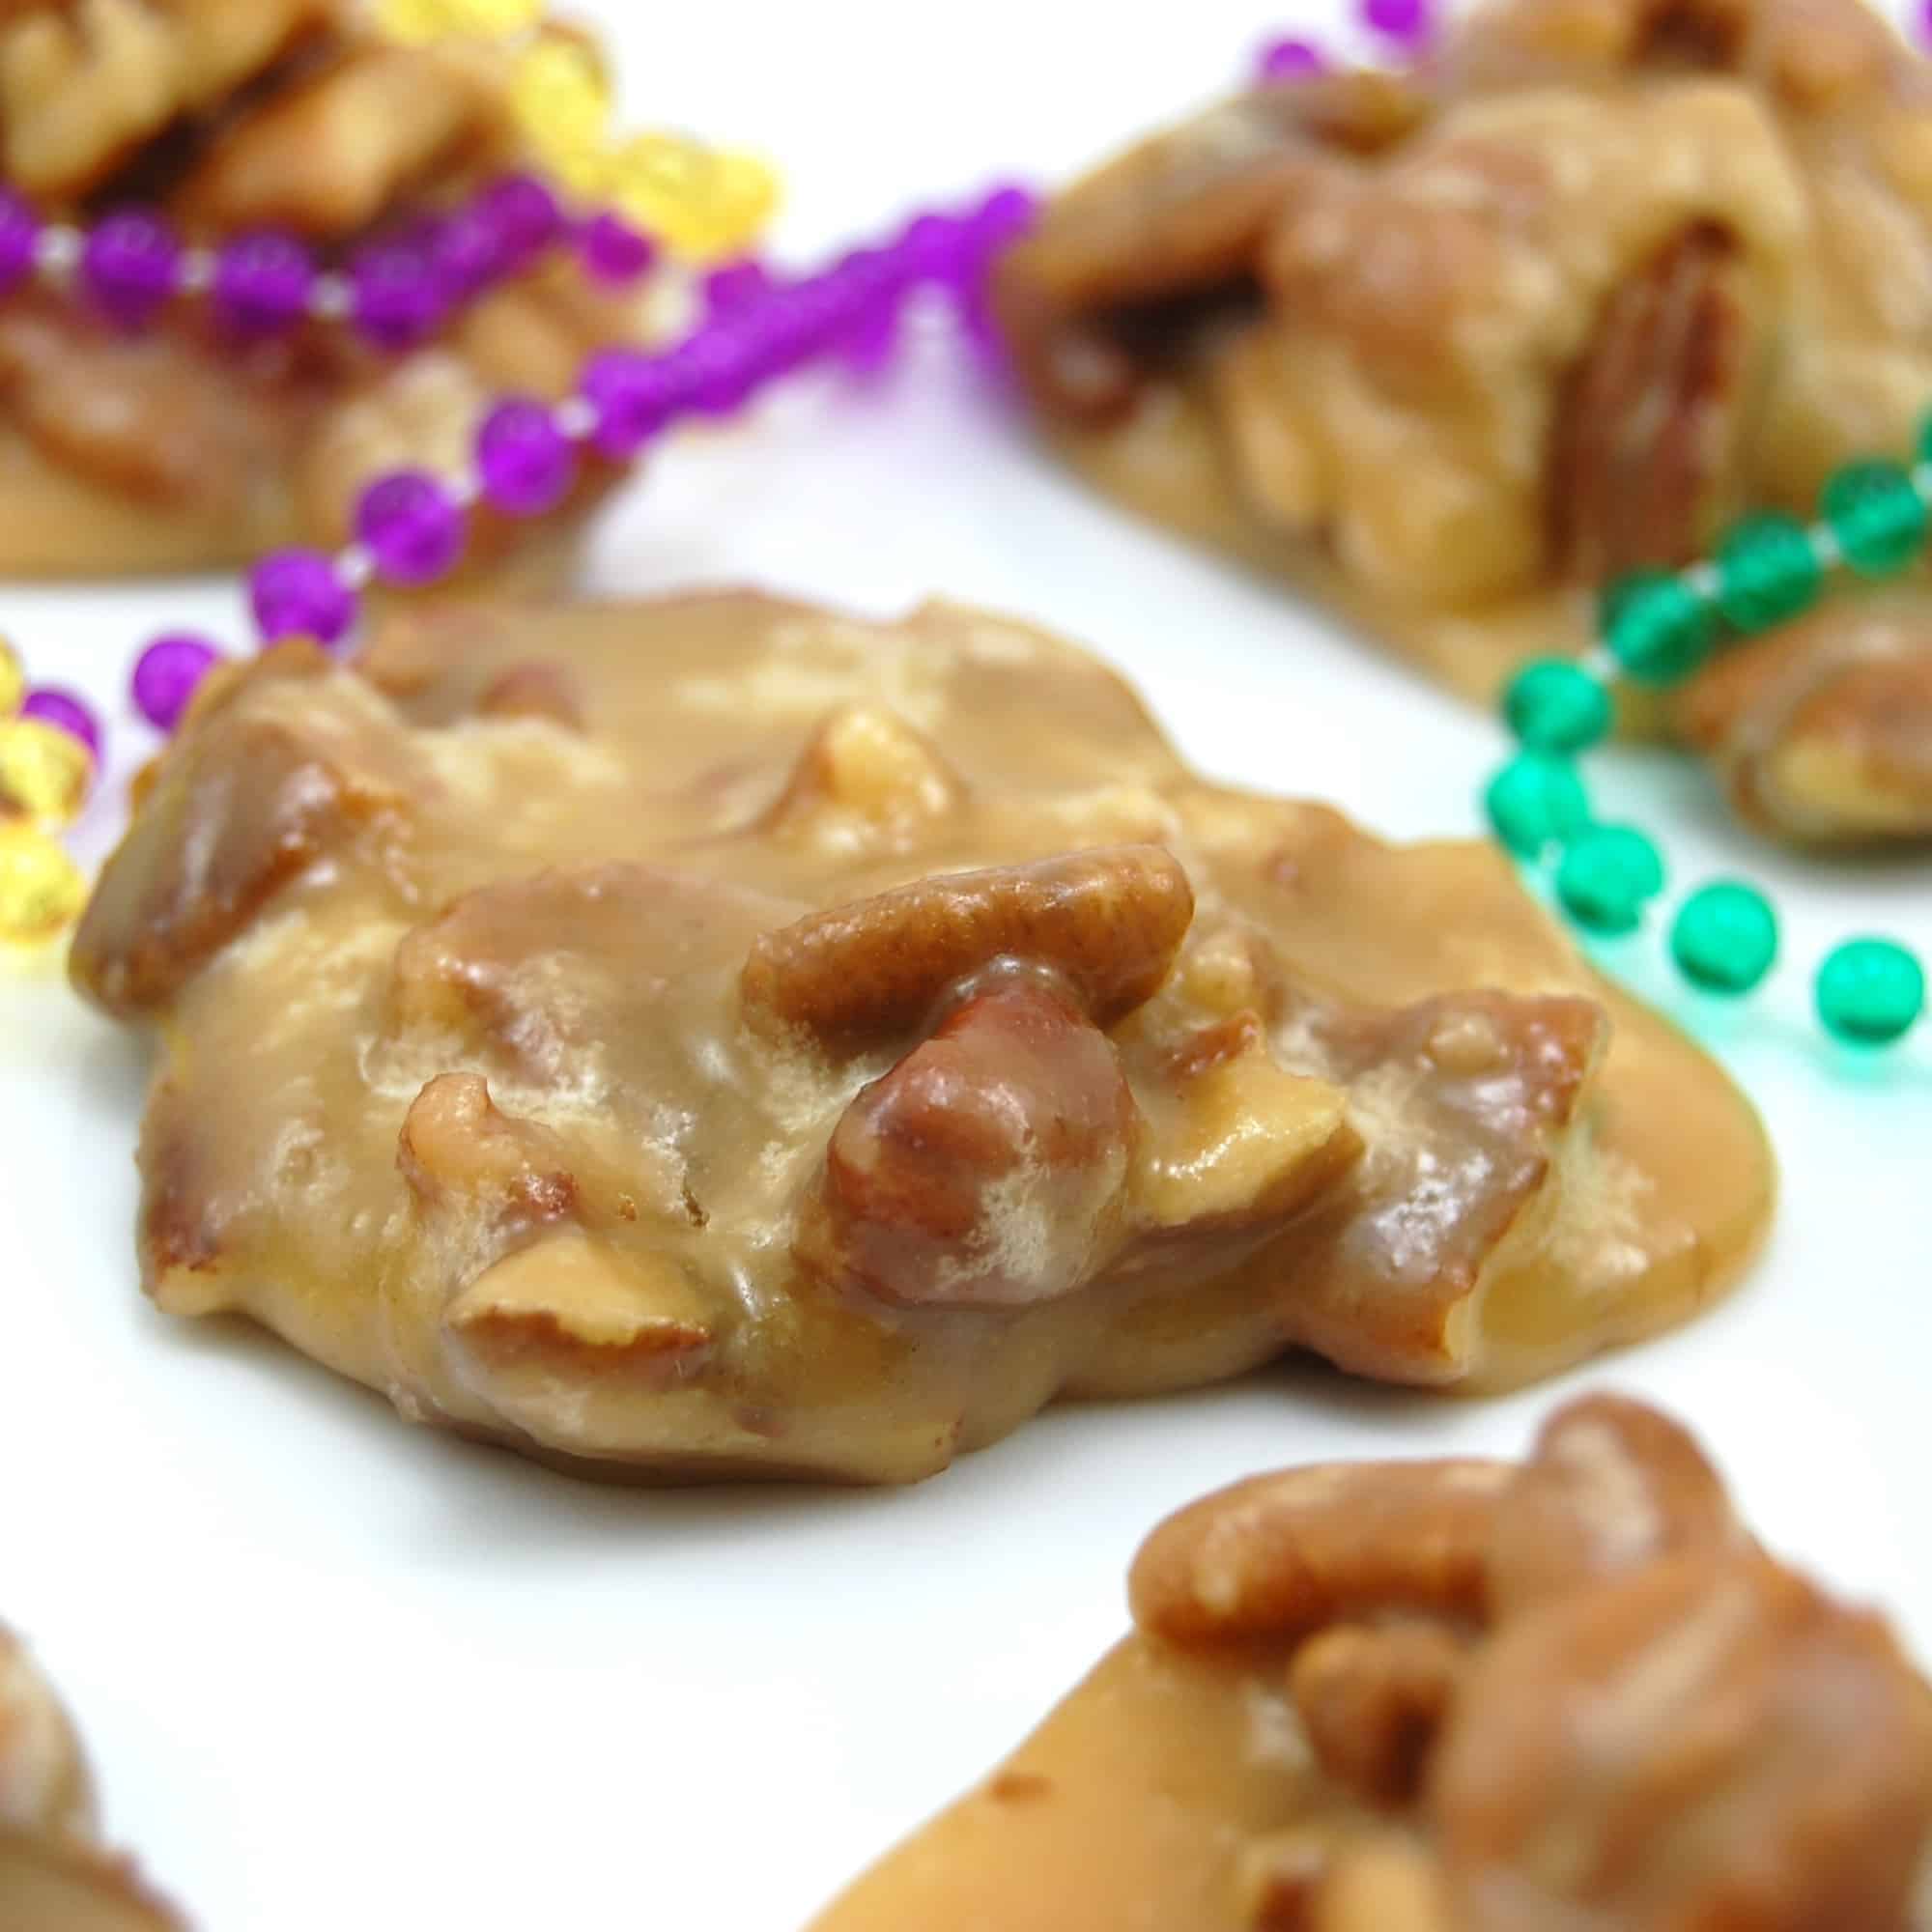 New Orleans Pralines On Plate